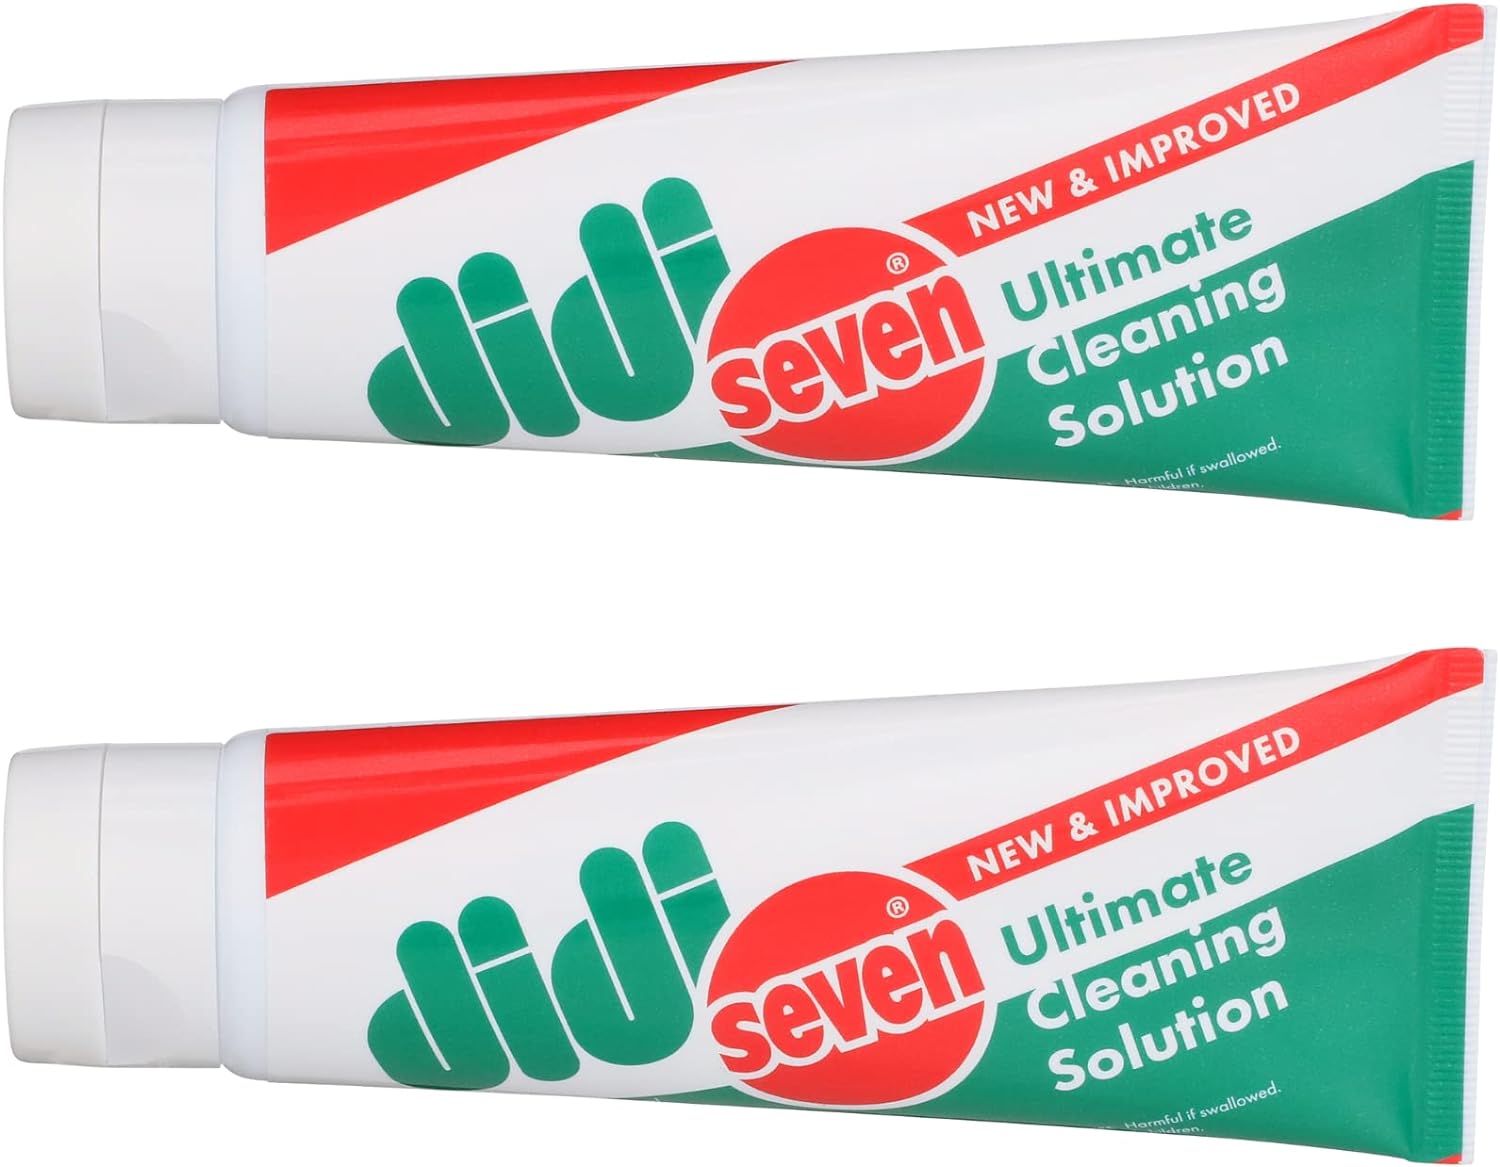 Multi-Purpose Universal Stain & Spot Remover, (Pack of 2, 2oz Tubes) - Ultra Tough Stain Cleaning Solution - Safe on Most Fabrics